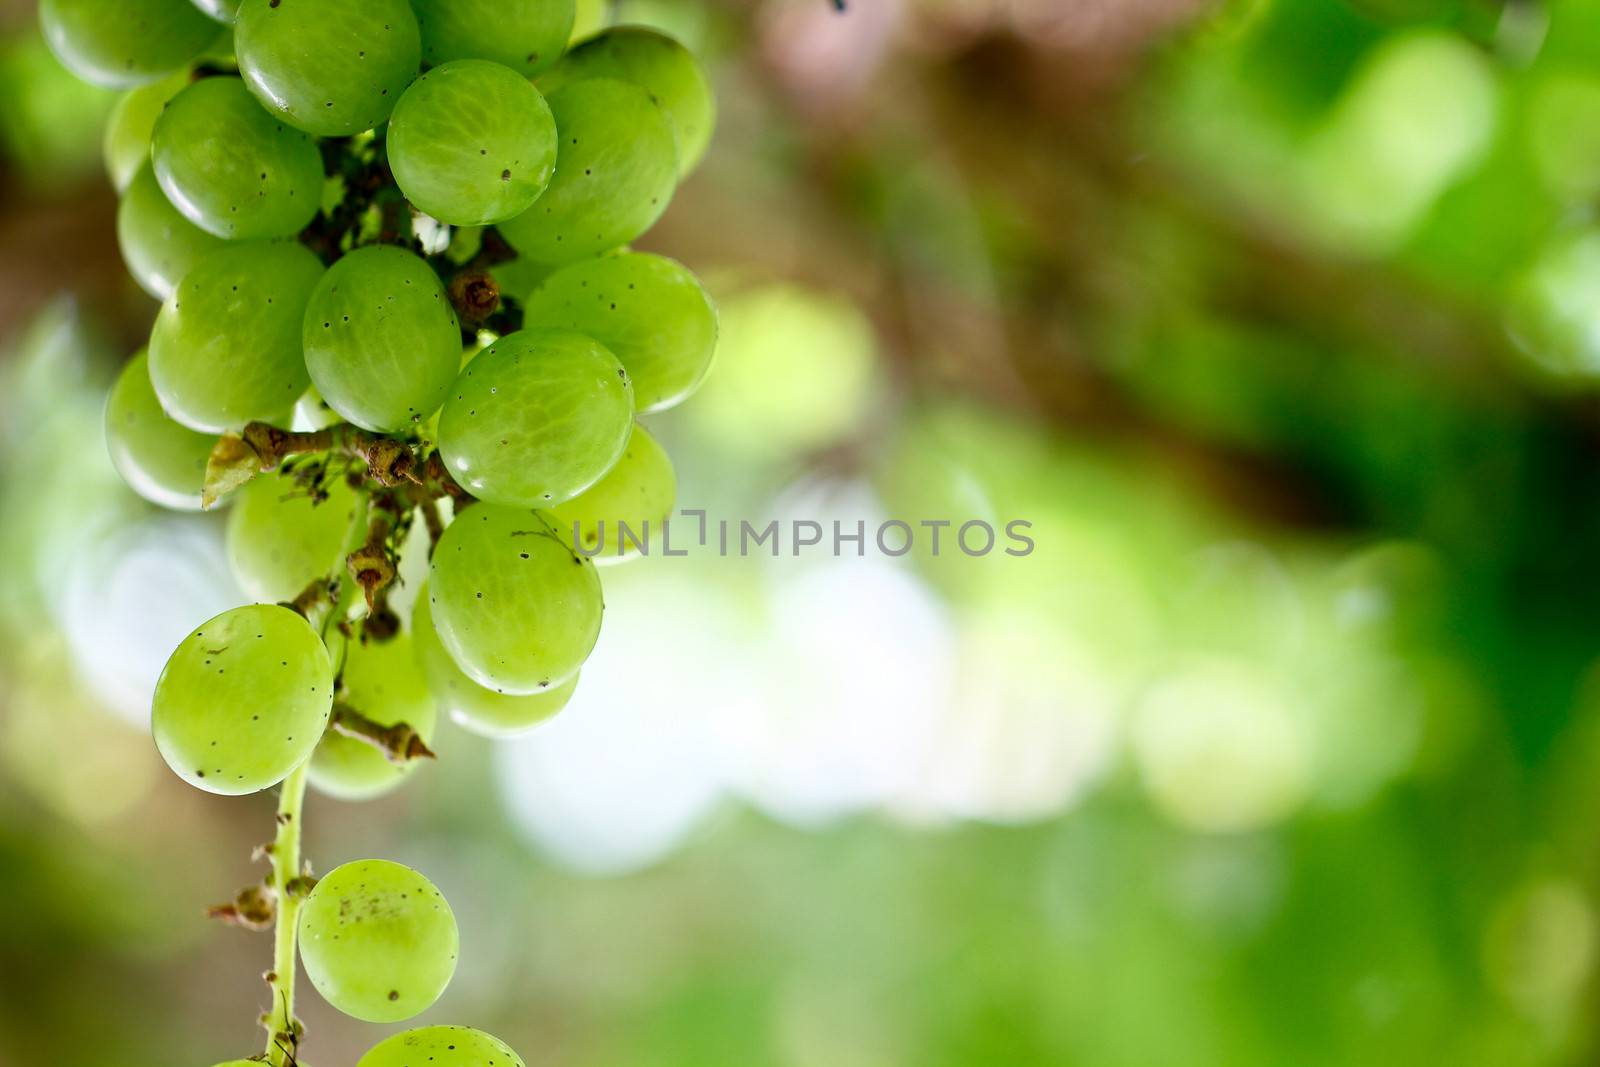 a binch of green grapes hanging from the plant